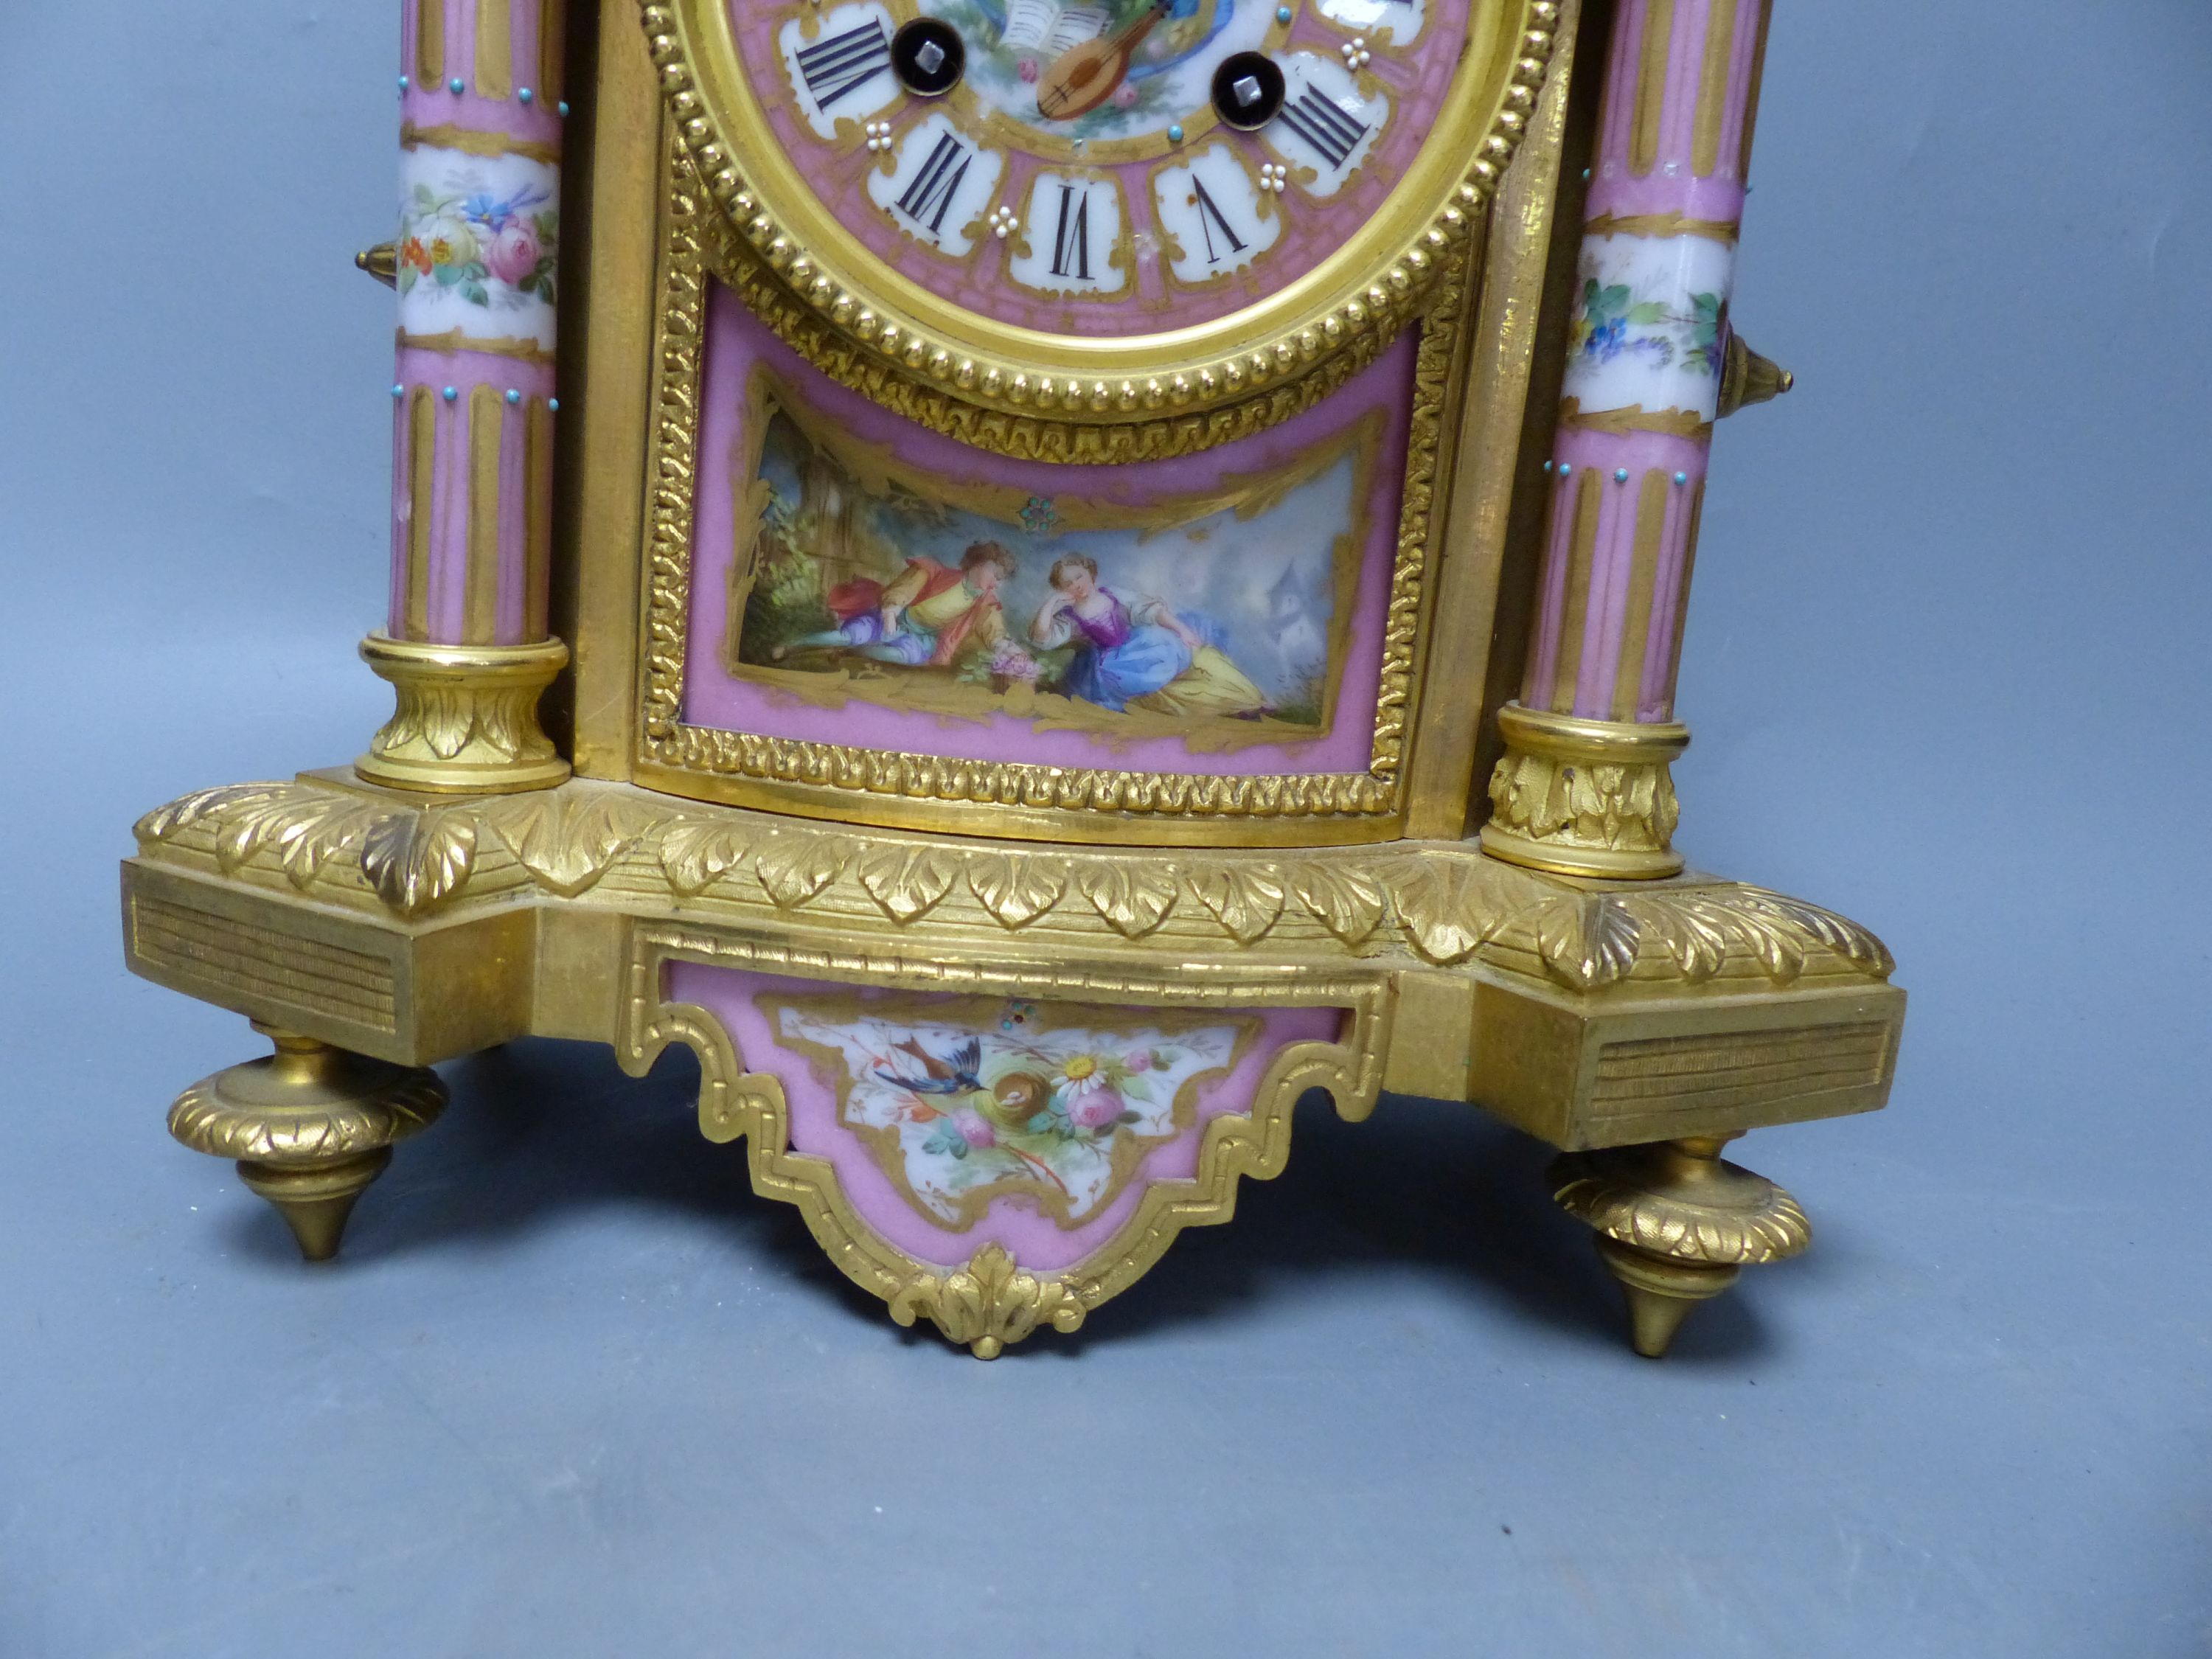 A French ormolu and porcelain mantel clock on plinth, overall height 43cm